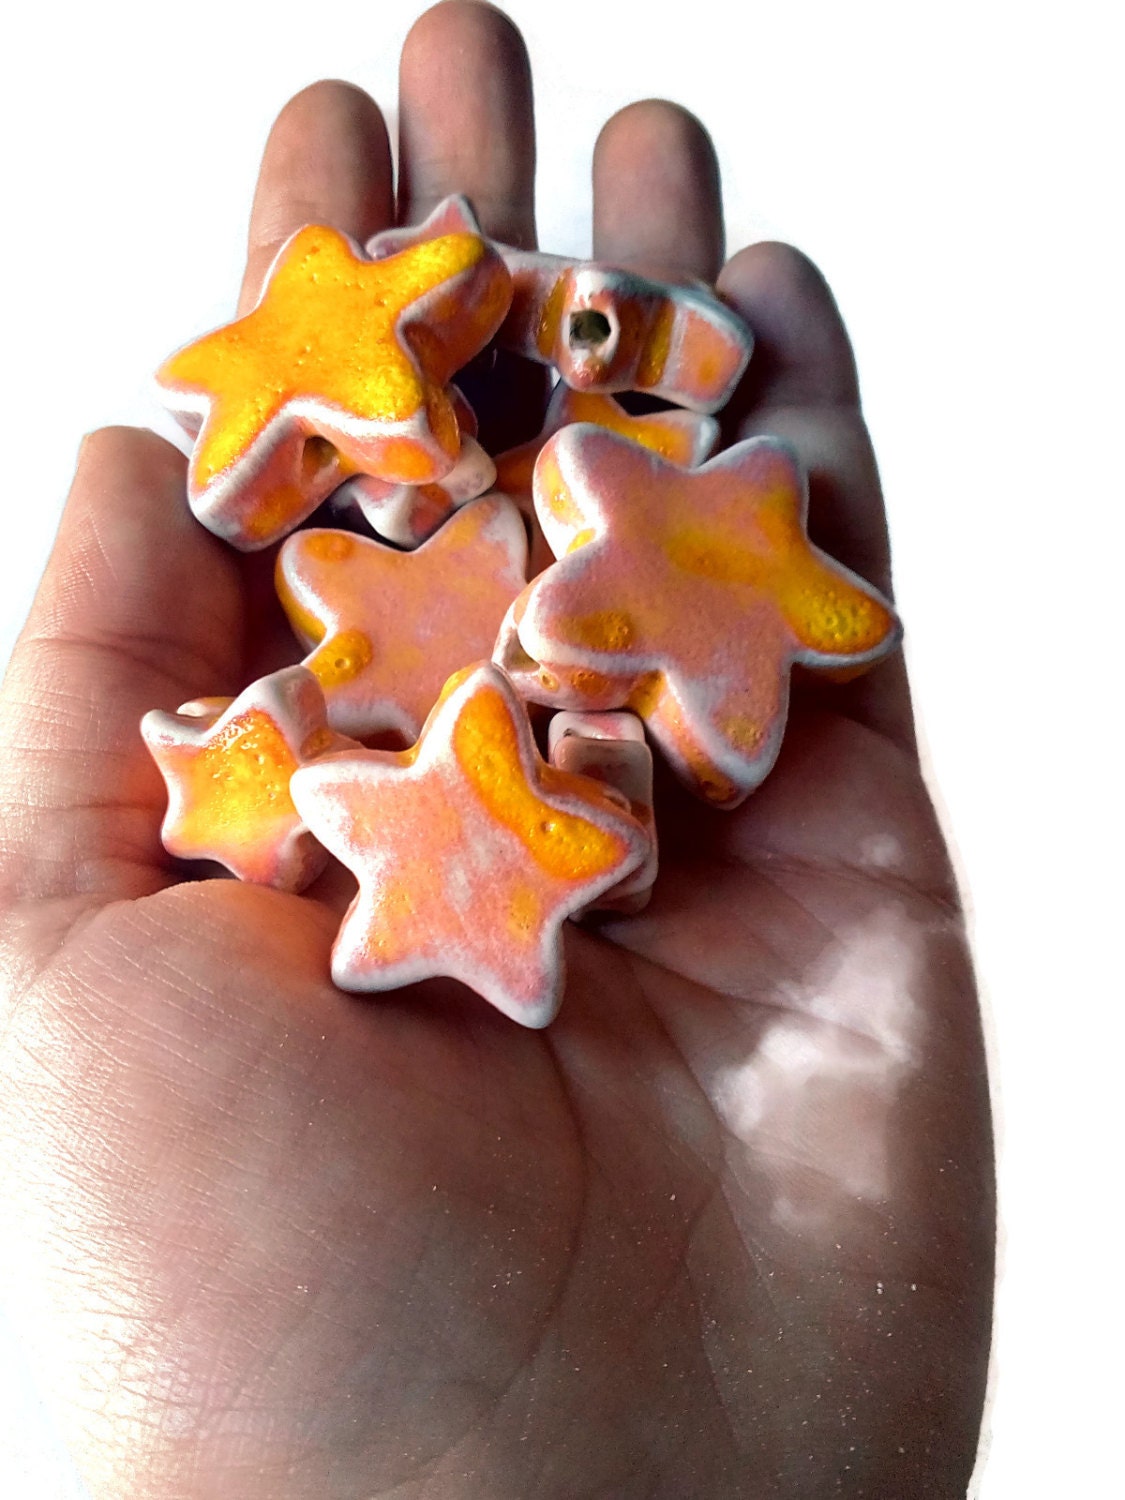 1Pc Handmade Ceramic Star Beads For Jewelry Making, Unique Clay Beads For Macrame, Large Beads, Unusual Porcelain Bead - Ceramica Ana Rafael